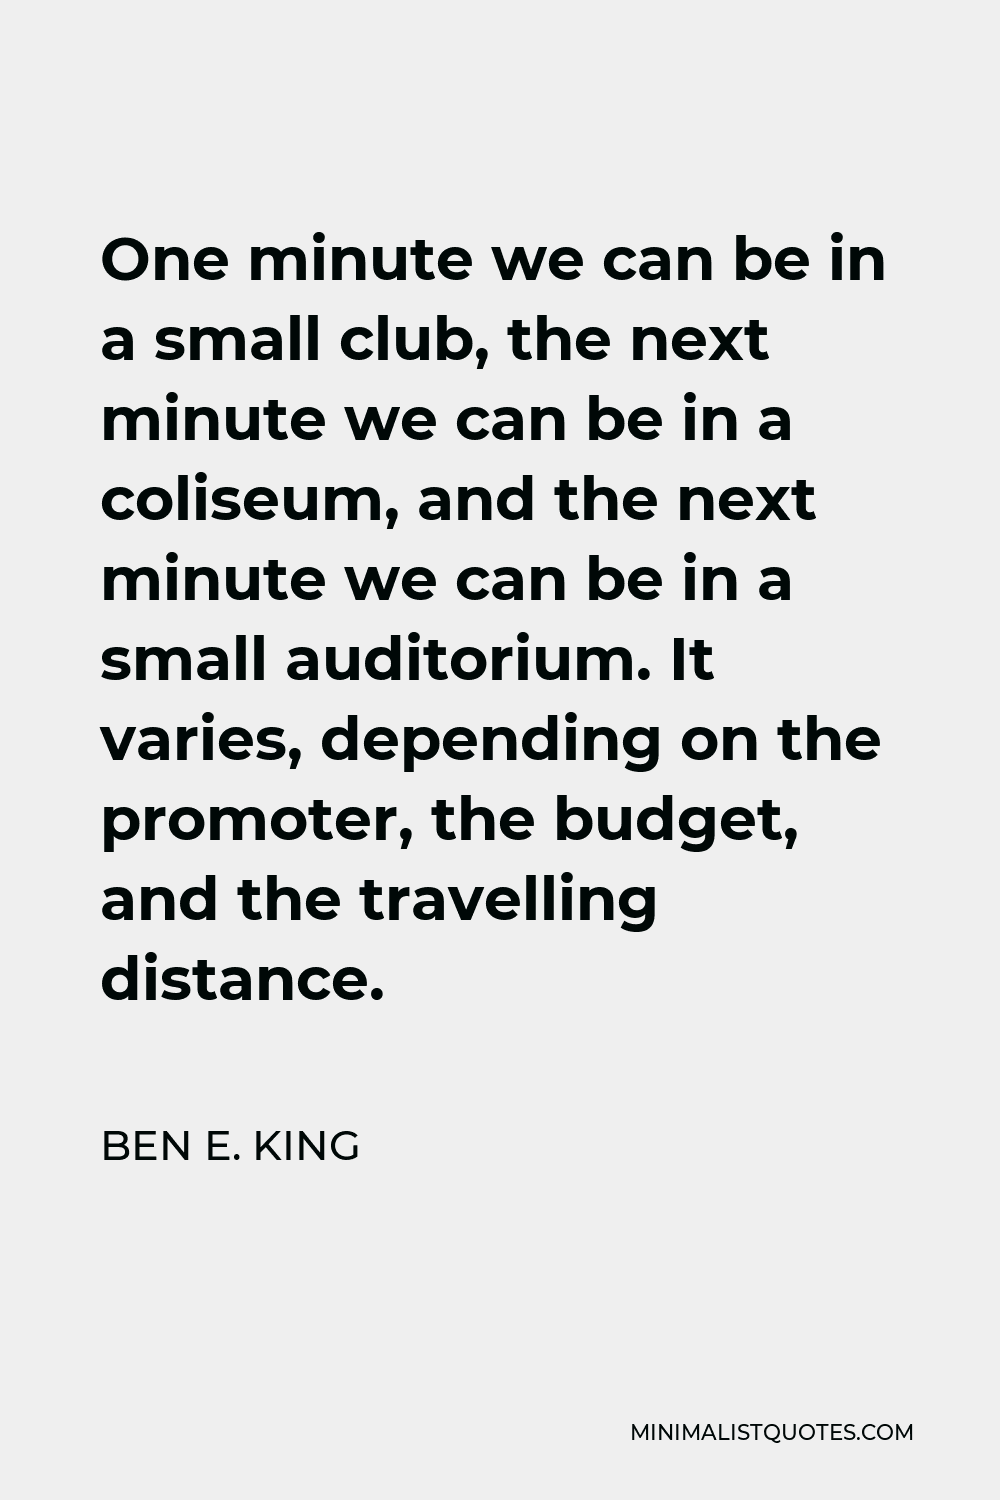 Ben E. King Quote - One minute we can be in a small club, the next minute we can be in a coliseum, and the next minute we can be in a small auditorium. It varies, depending on the promoter, the budget, and the travelling distance.